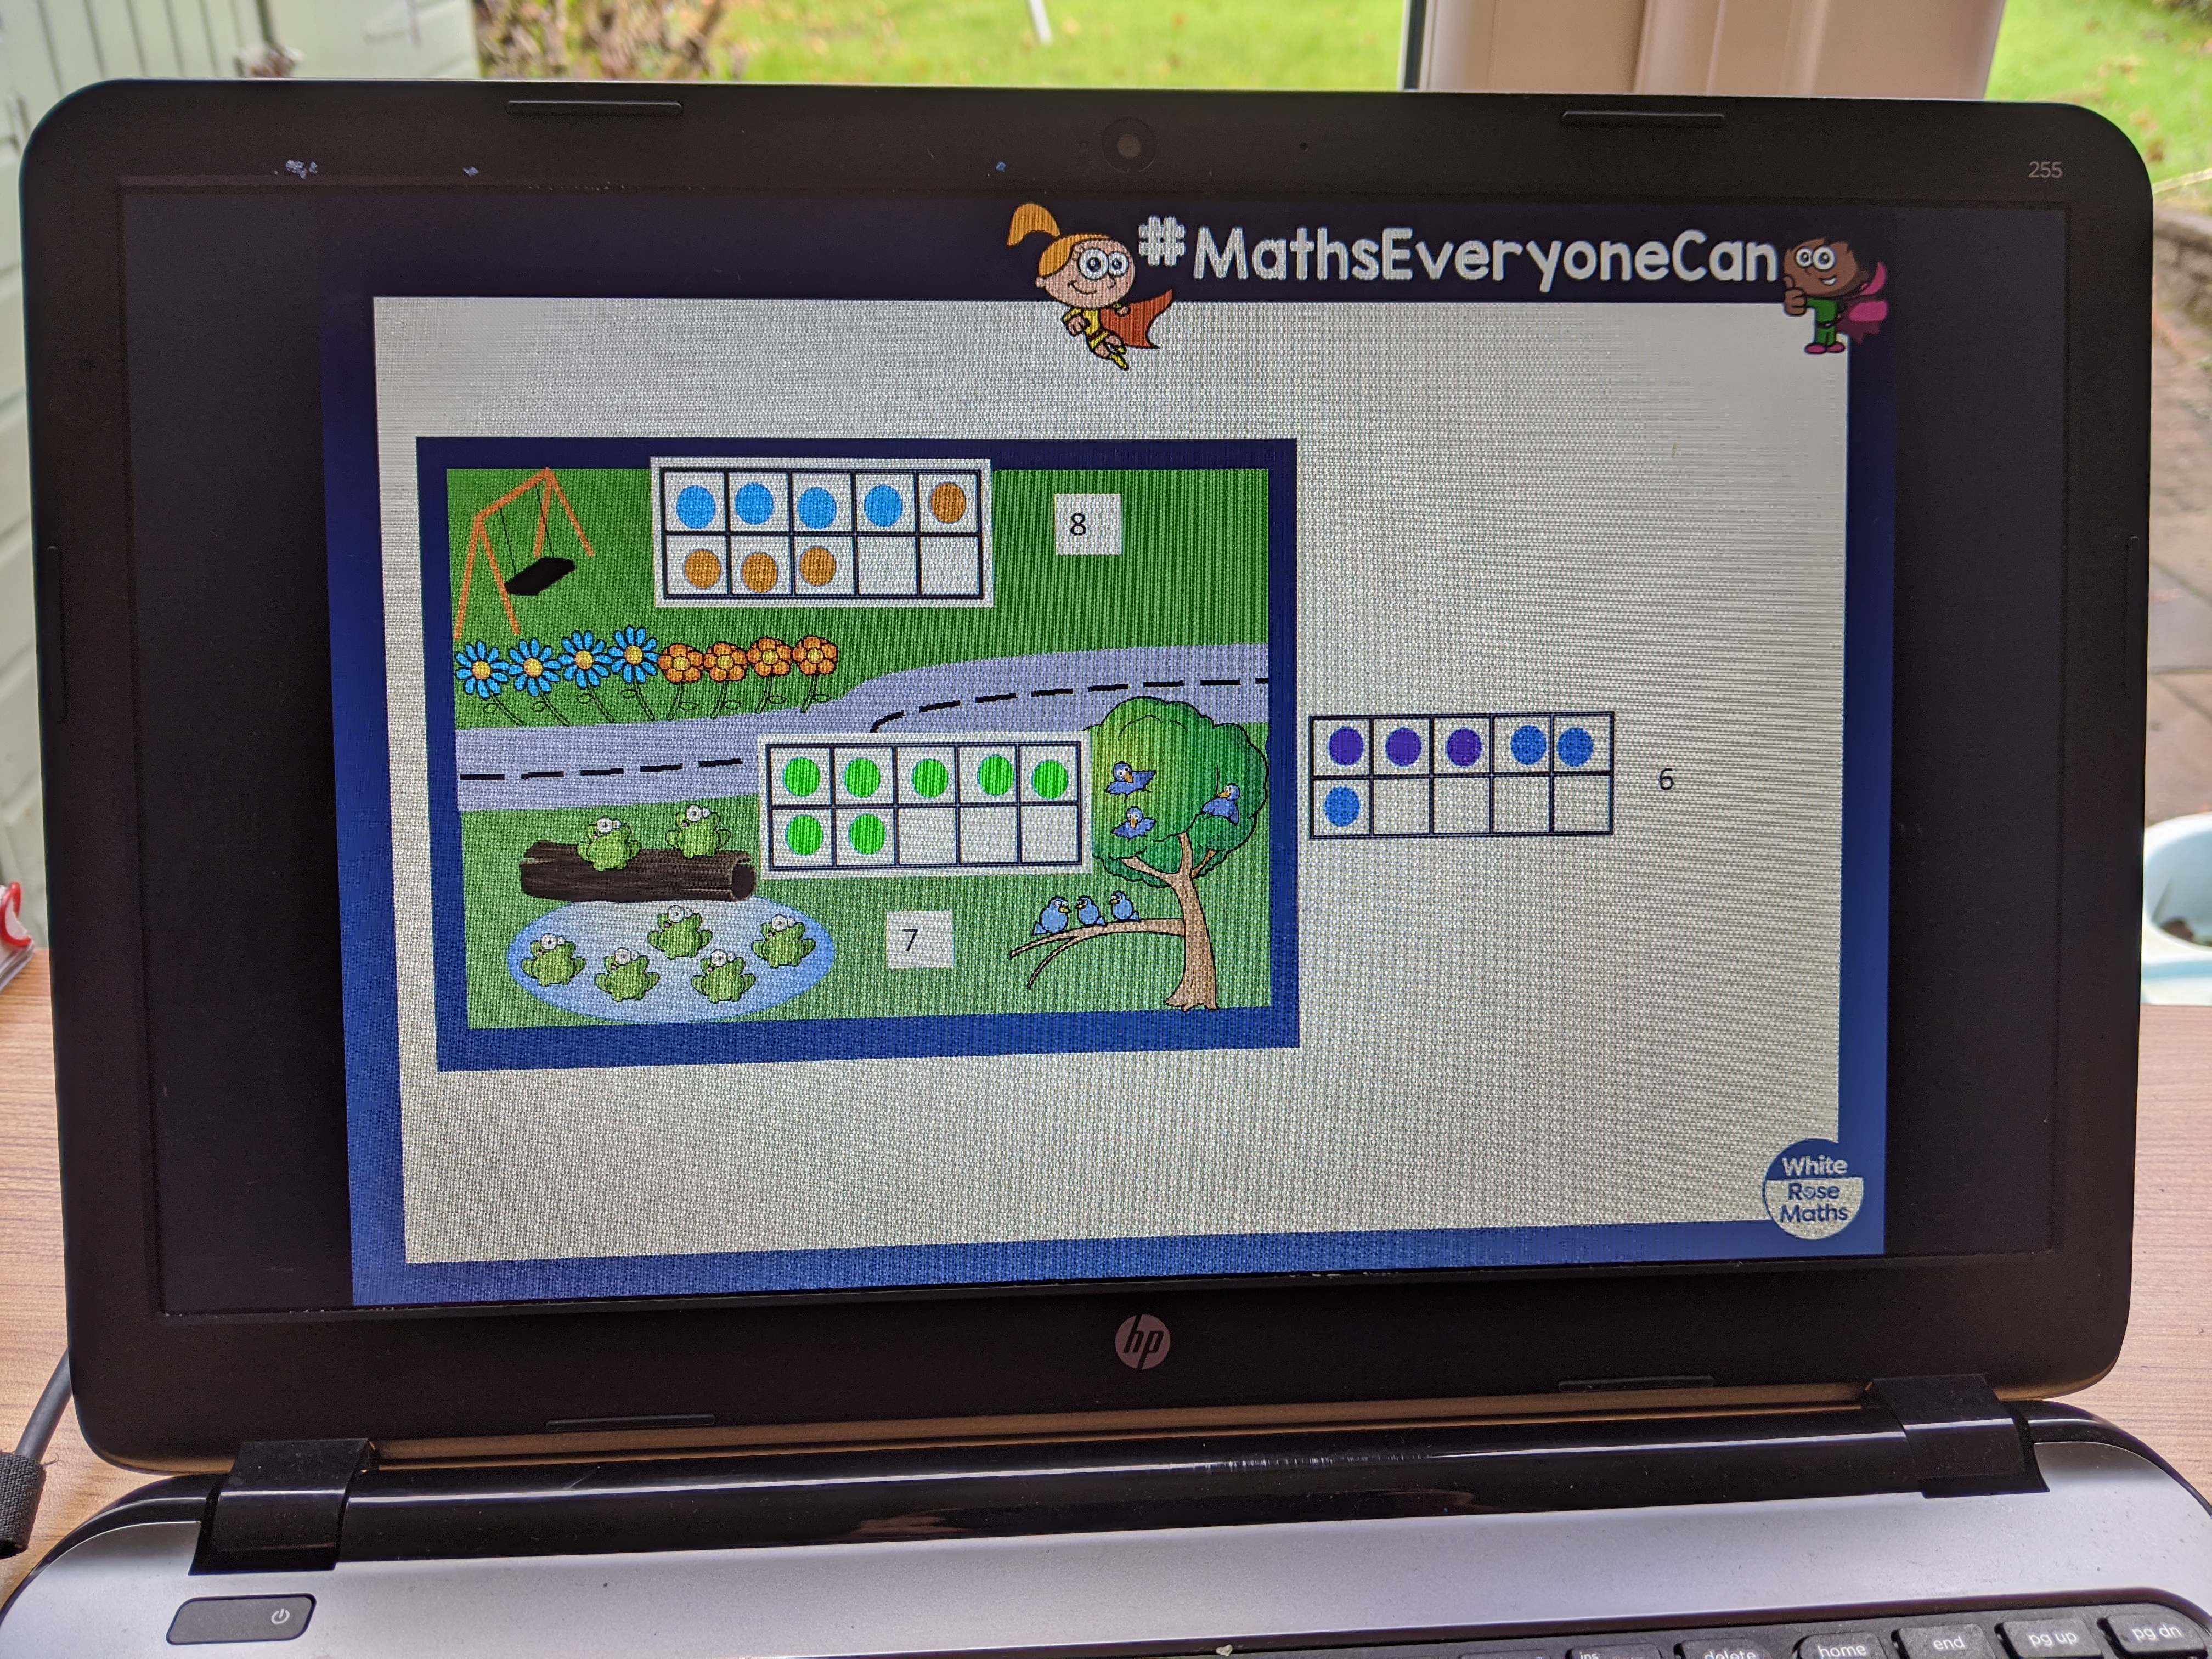 Wed maths adding 2 groups of numbers online Roseanna